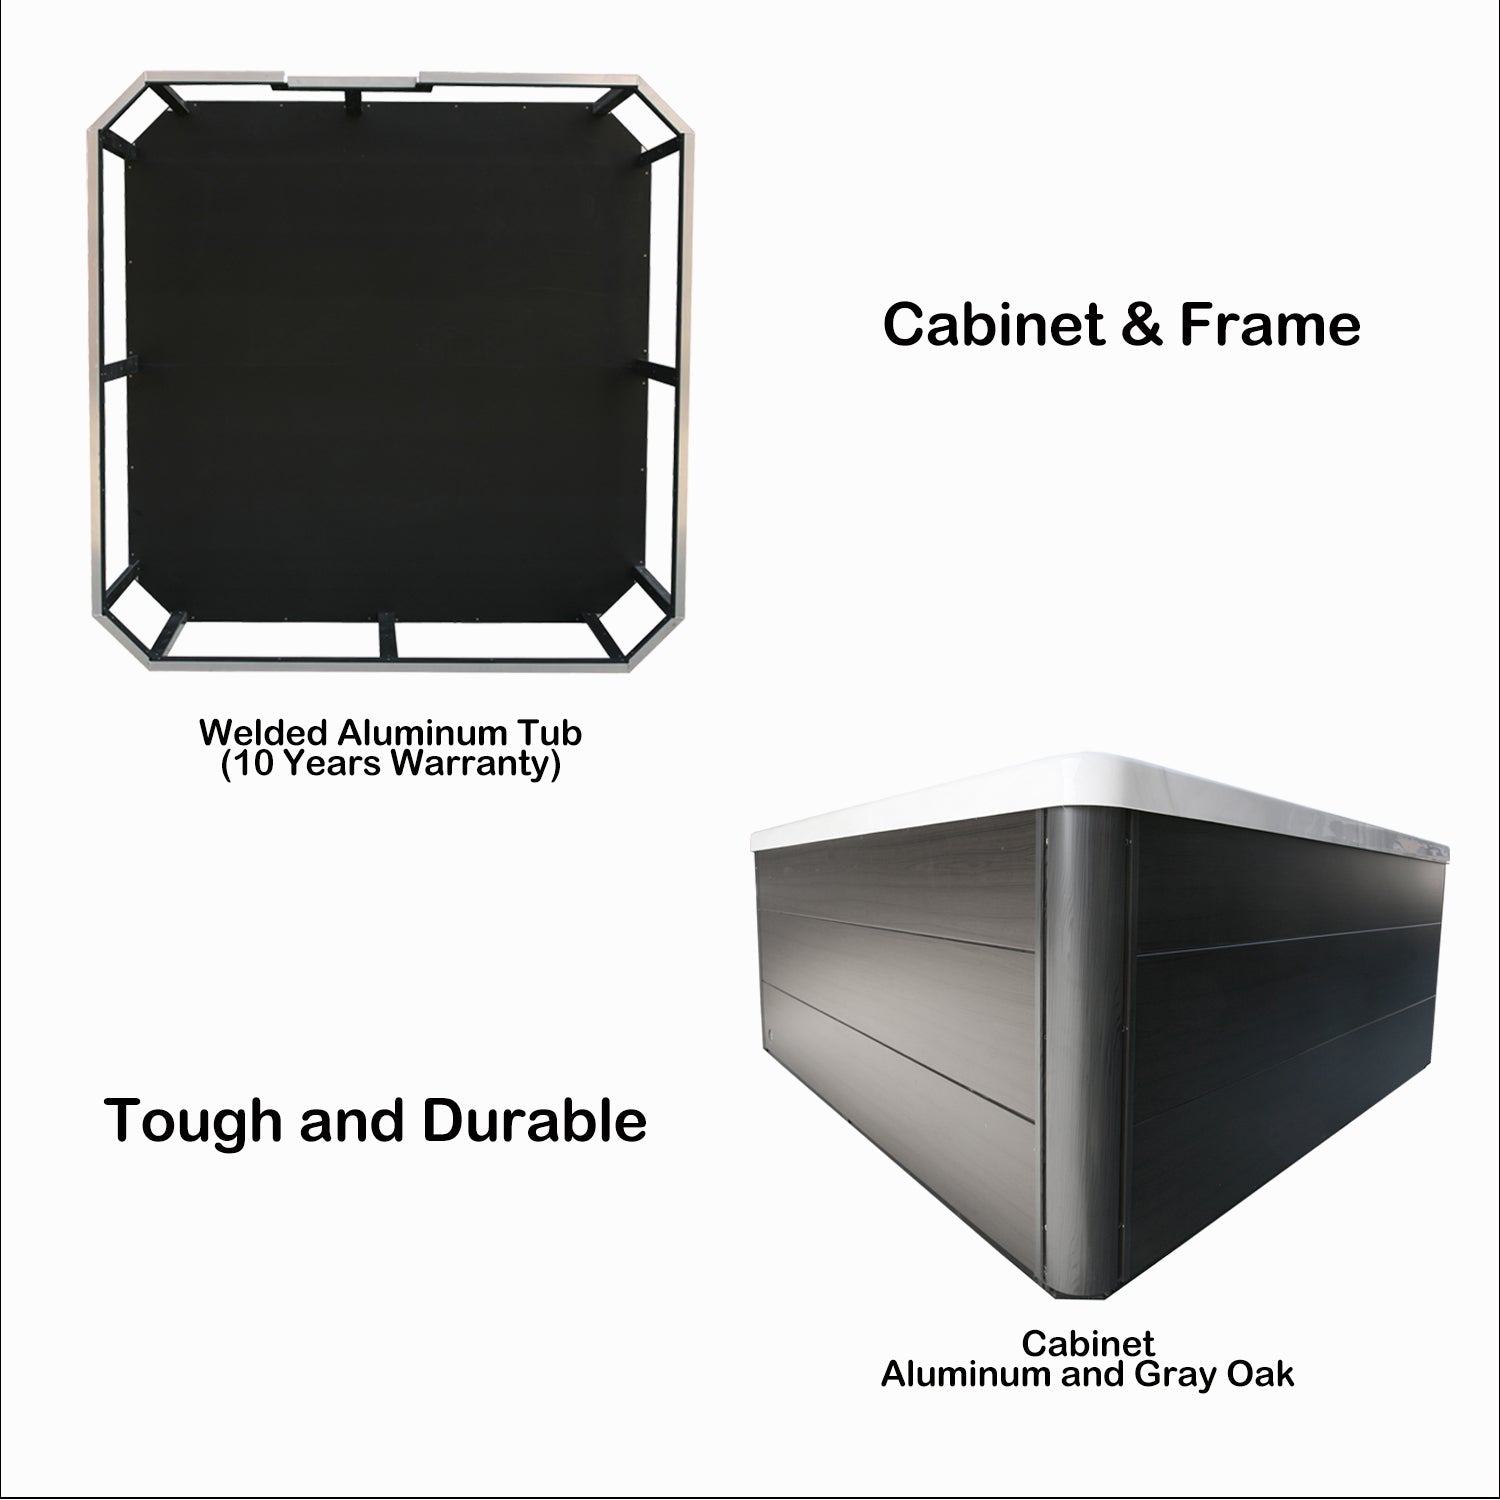 Cygnus I cabinet and frame made of welded aluminum, 10 years warranty, tough and durable